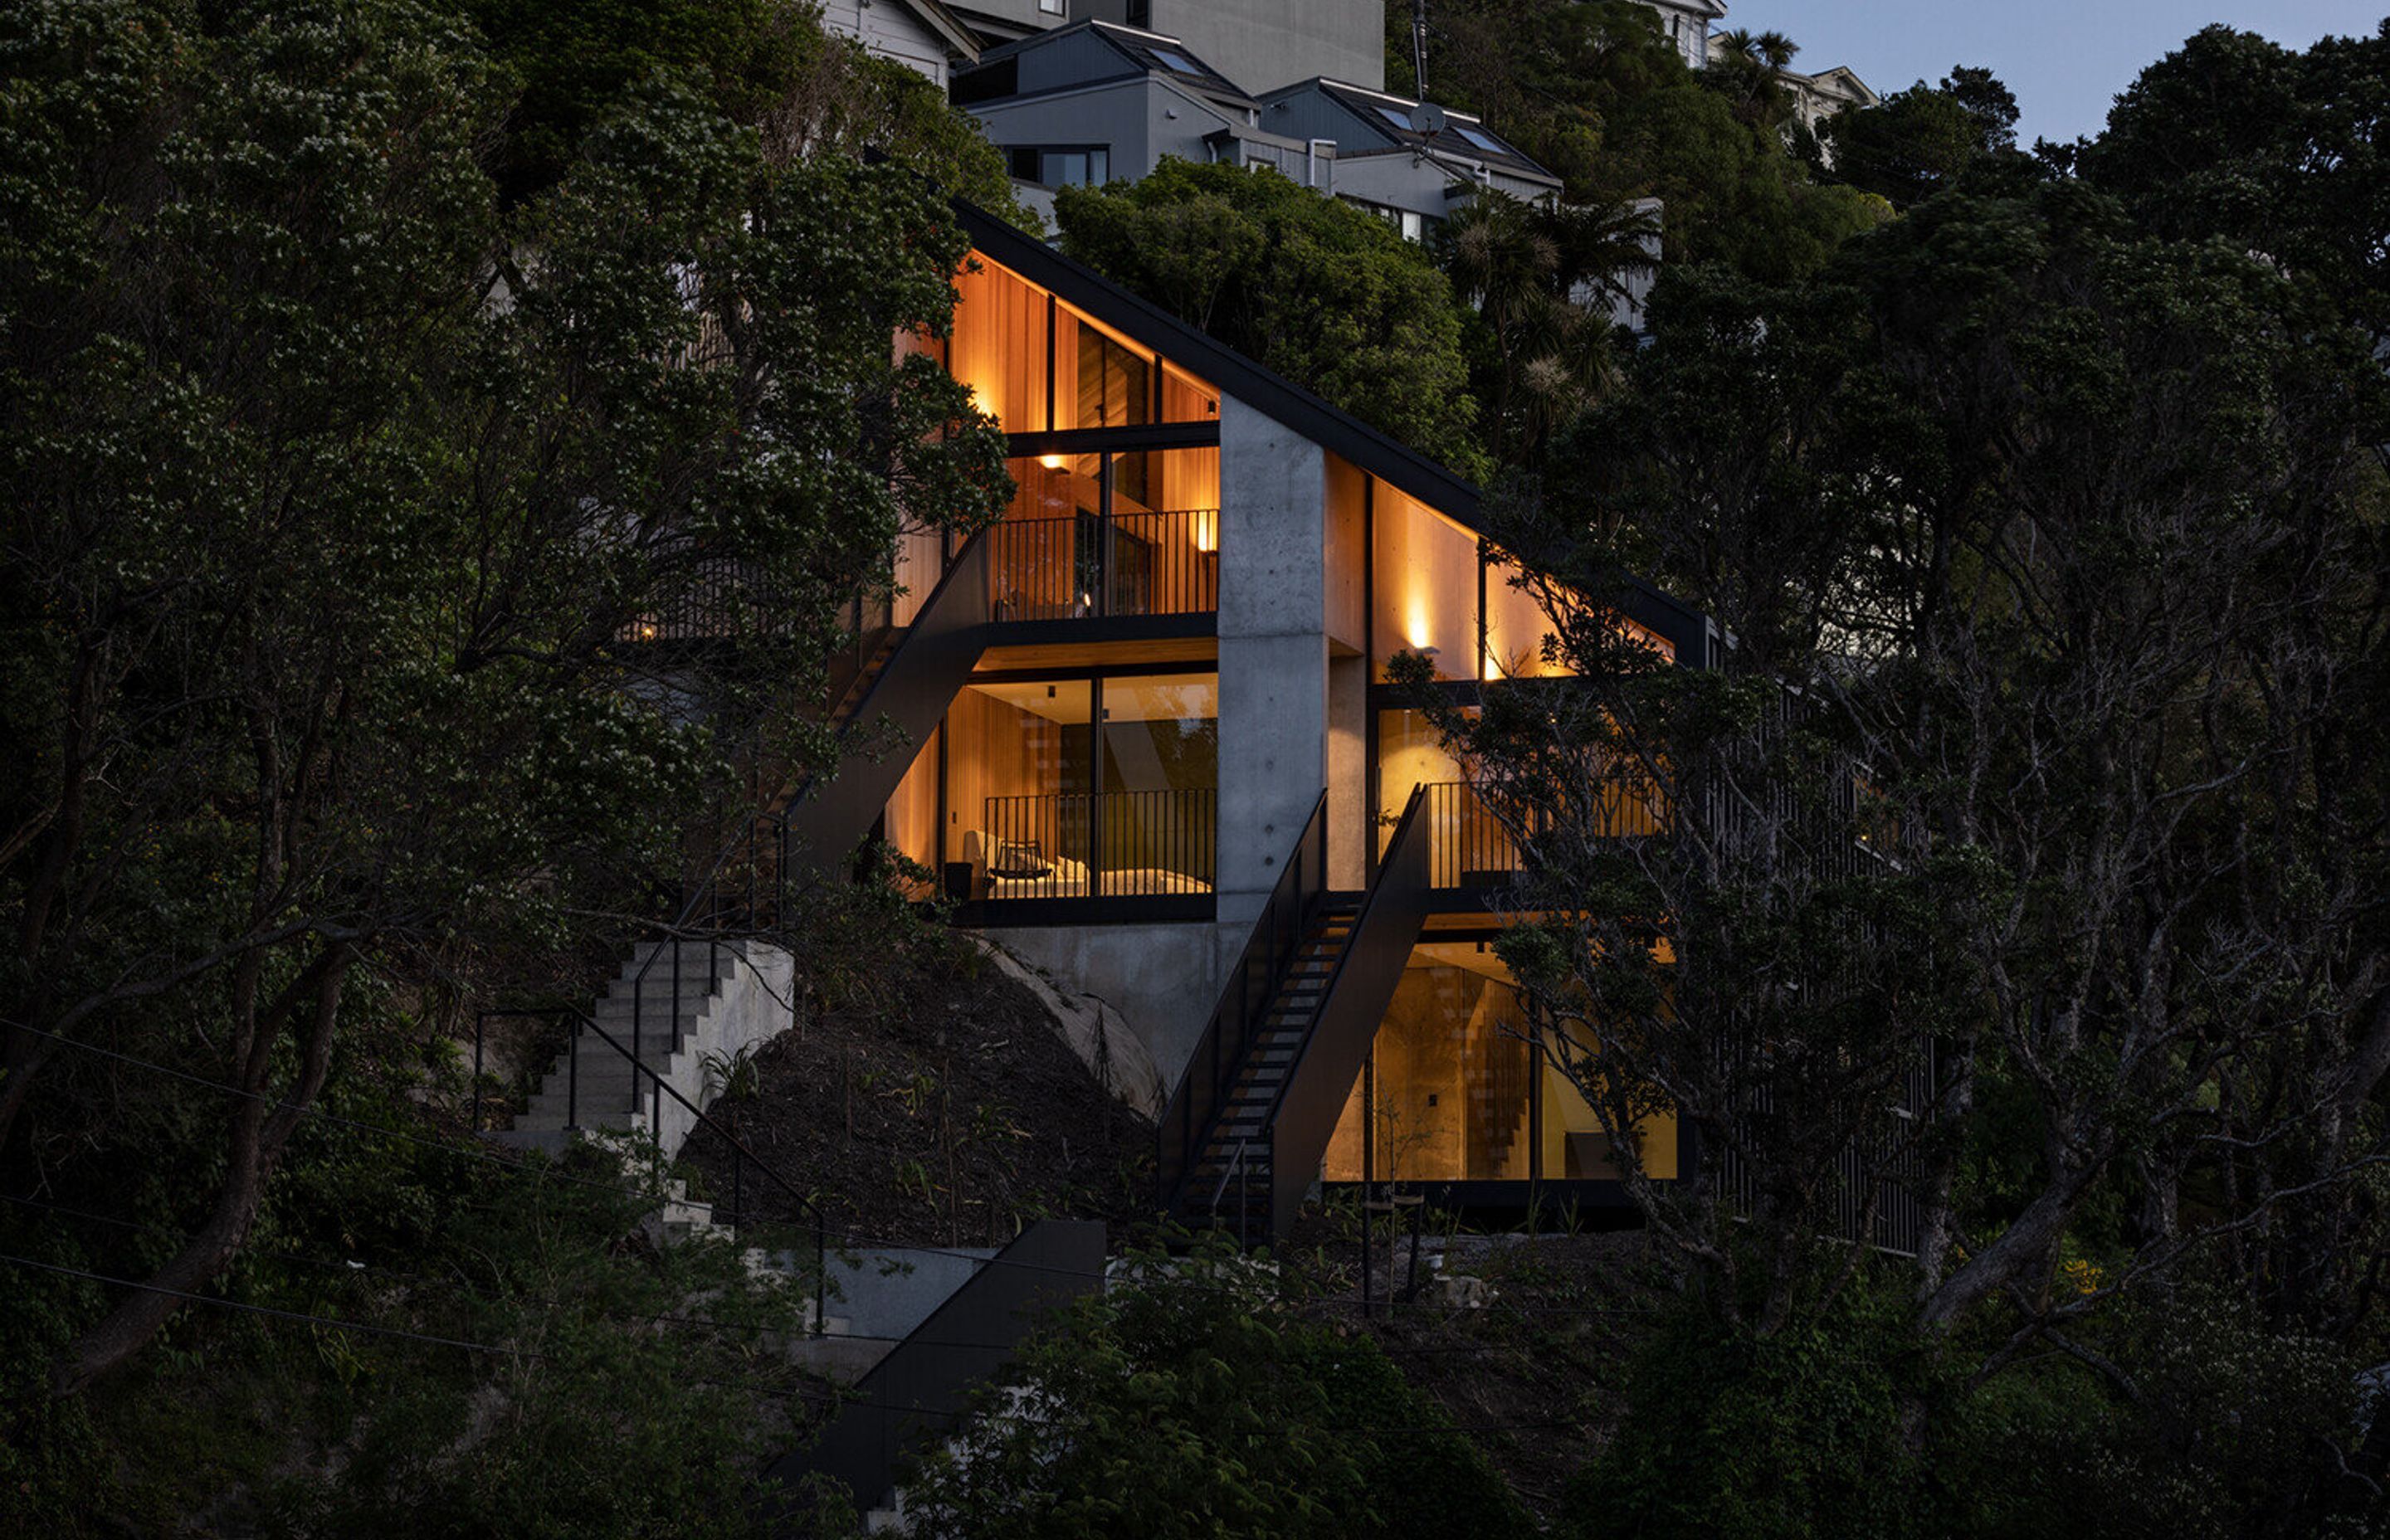 Adam and Josh are proud of the work Dorset Construction has accomplished – often bringing complex designs to life such as the Party Wall house situated on a hill overlooking Kelburn Viaduct in Wellington.